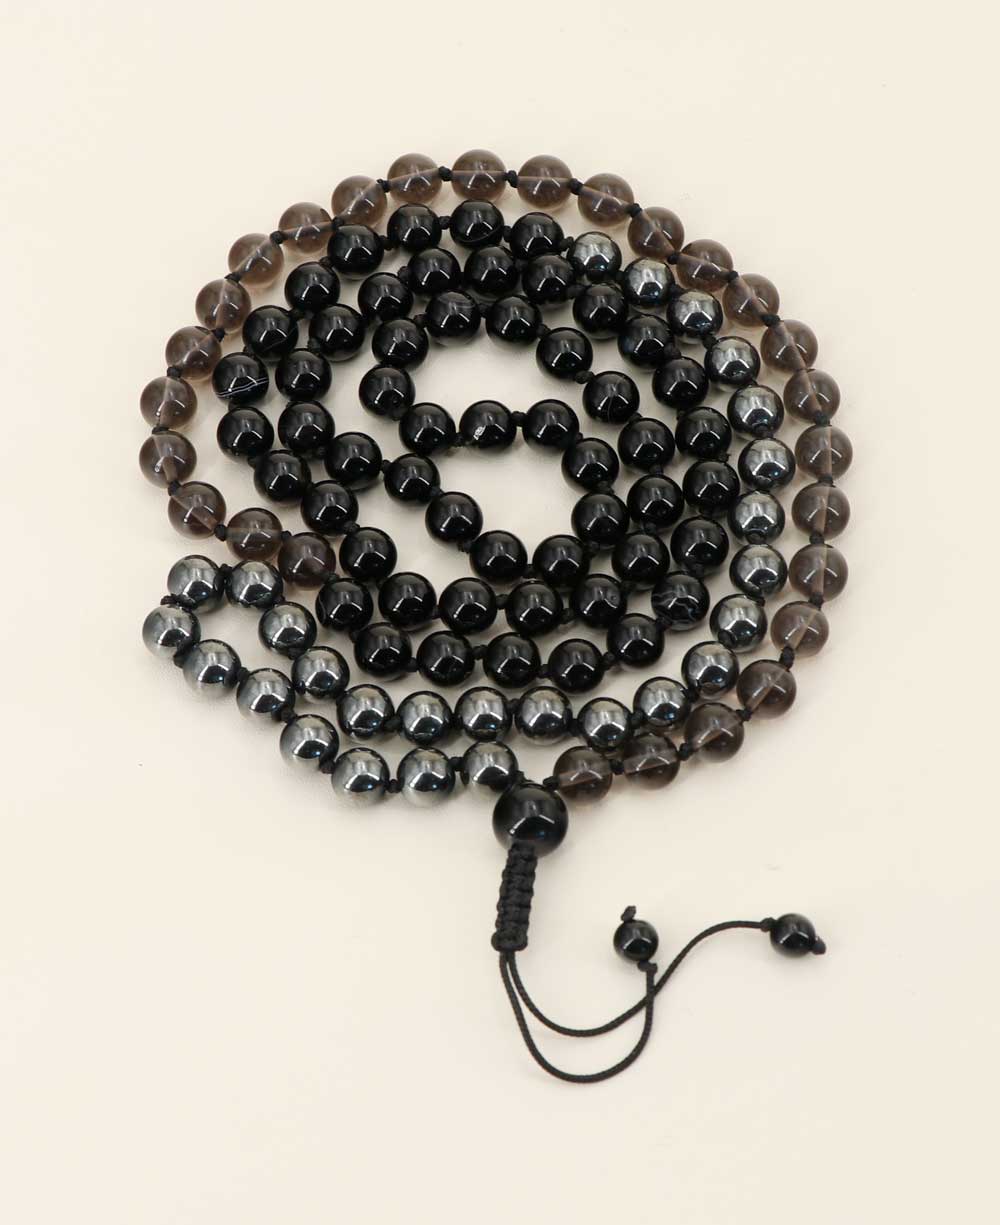 Protection and Centering Gemstones Knotted 108 Beads Meditation Mala - Prayer Beads